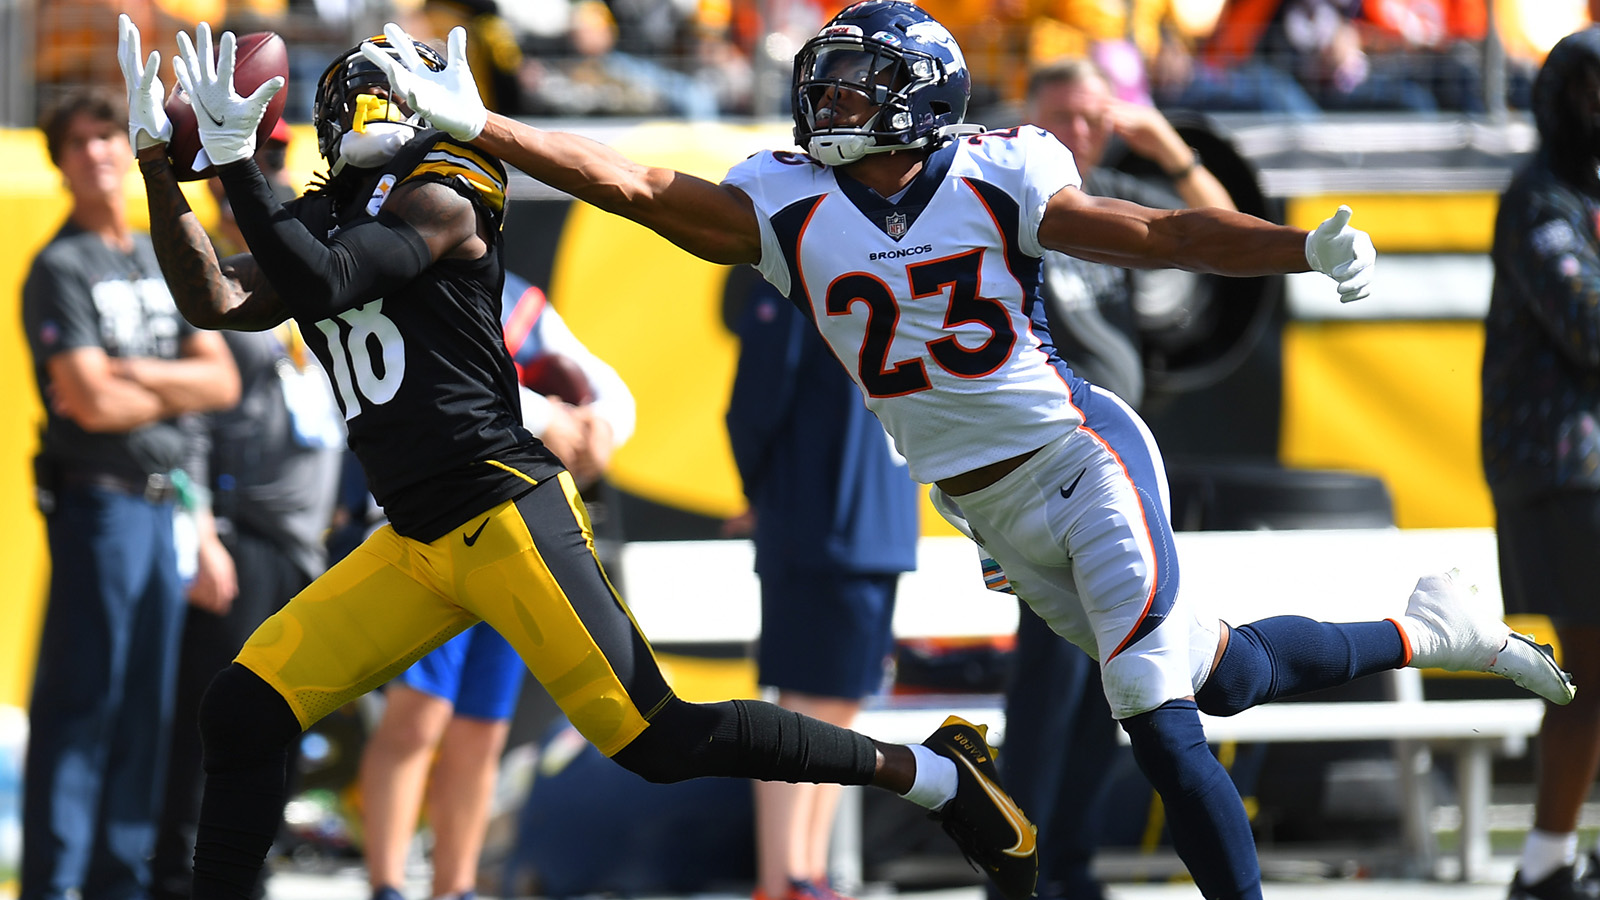 Diontae Johnson of the Pittsburgh Steelers catches a 50-yard touchdown pass from Ben Roethlisberger against the Denver Broncos during the first quarter at Heinz Field on Oct. 10, 2021.